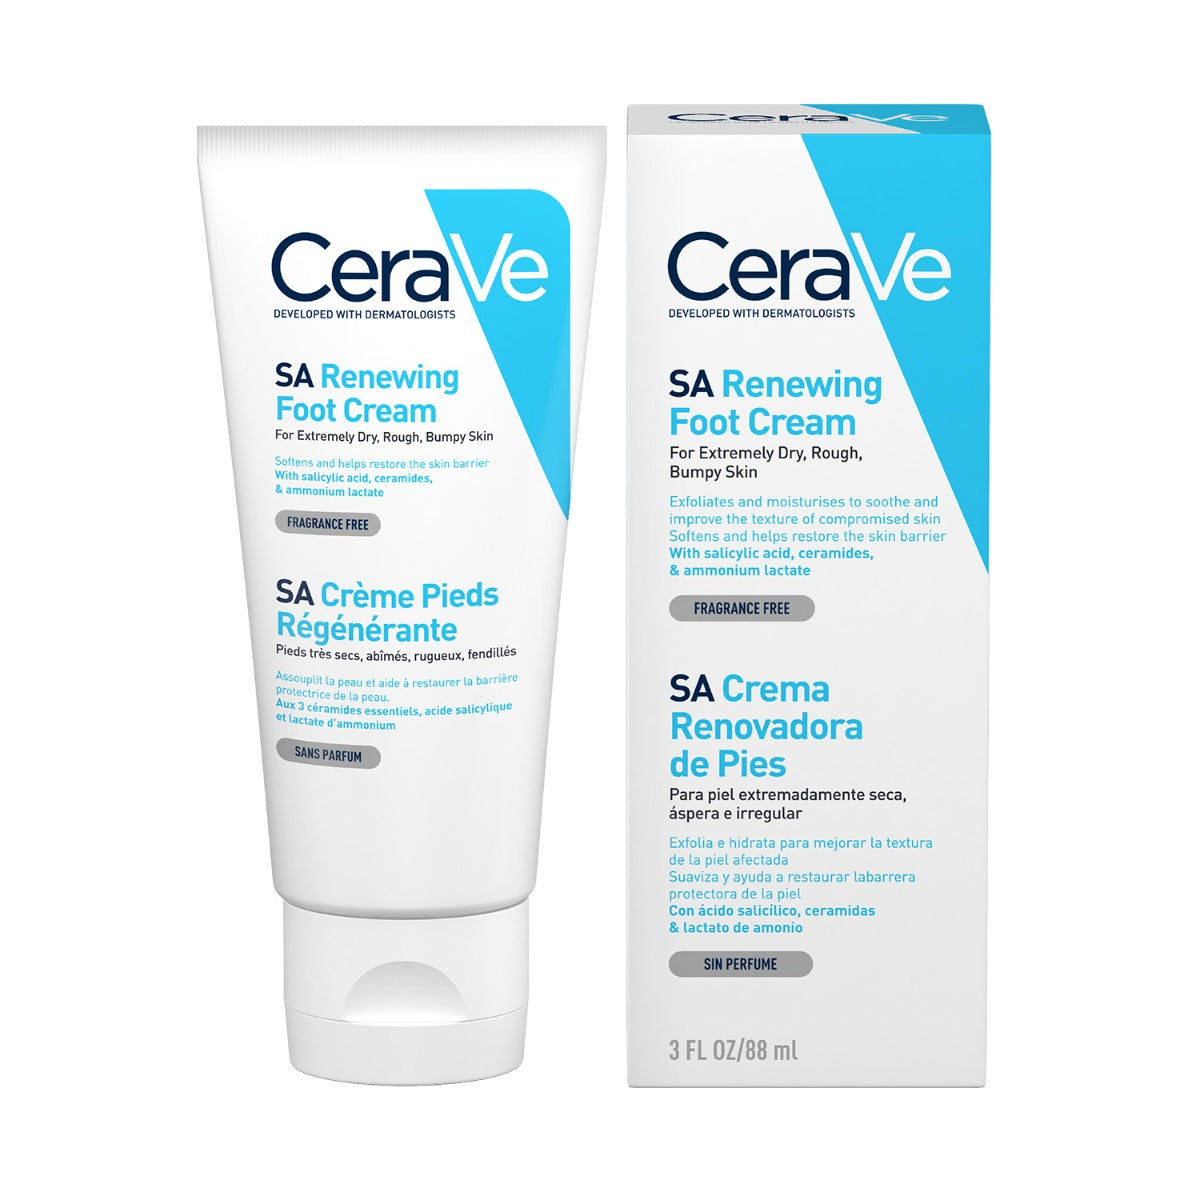 CeraVe SA Renewing Foot Cream with Salicylic Acid for Dry, Rough Feet, 88ml